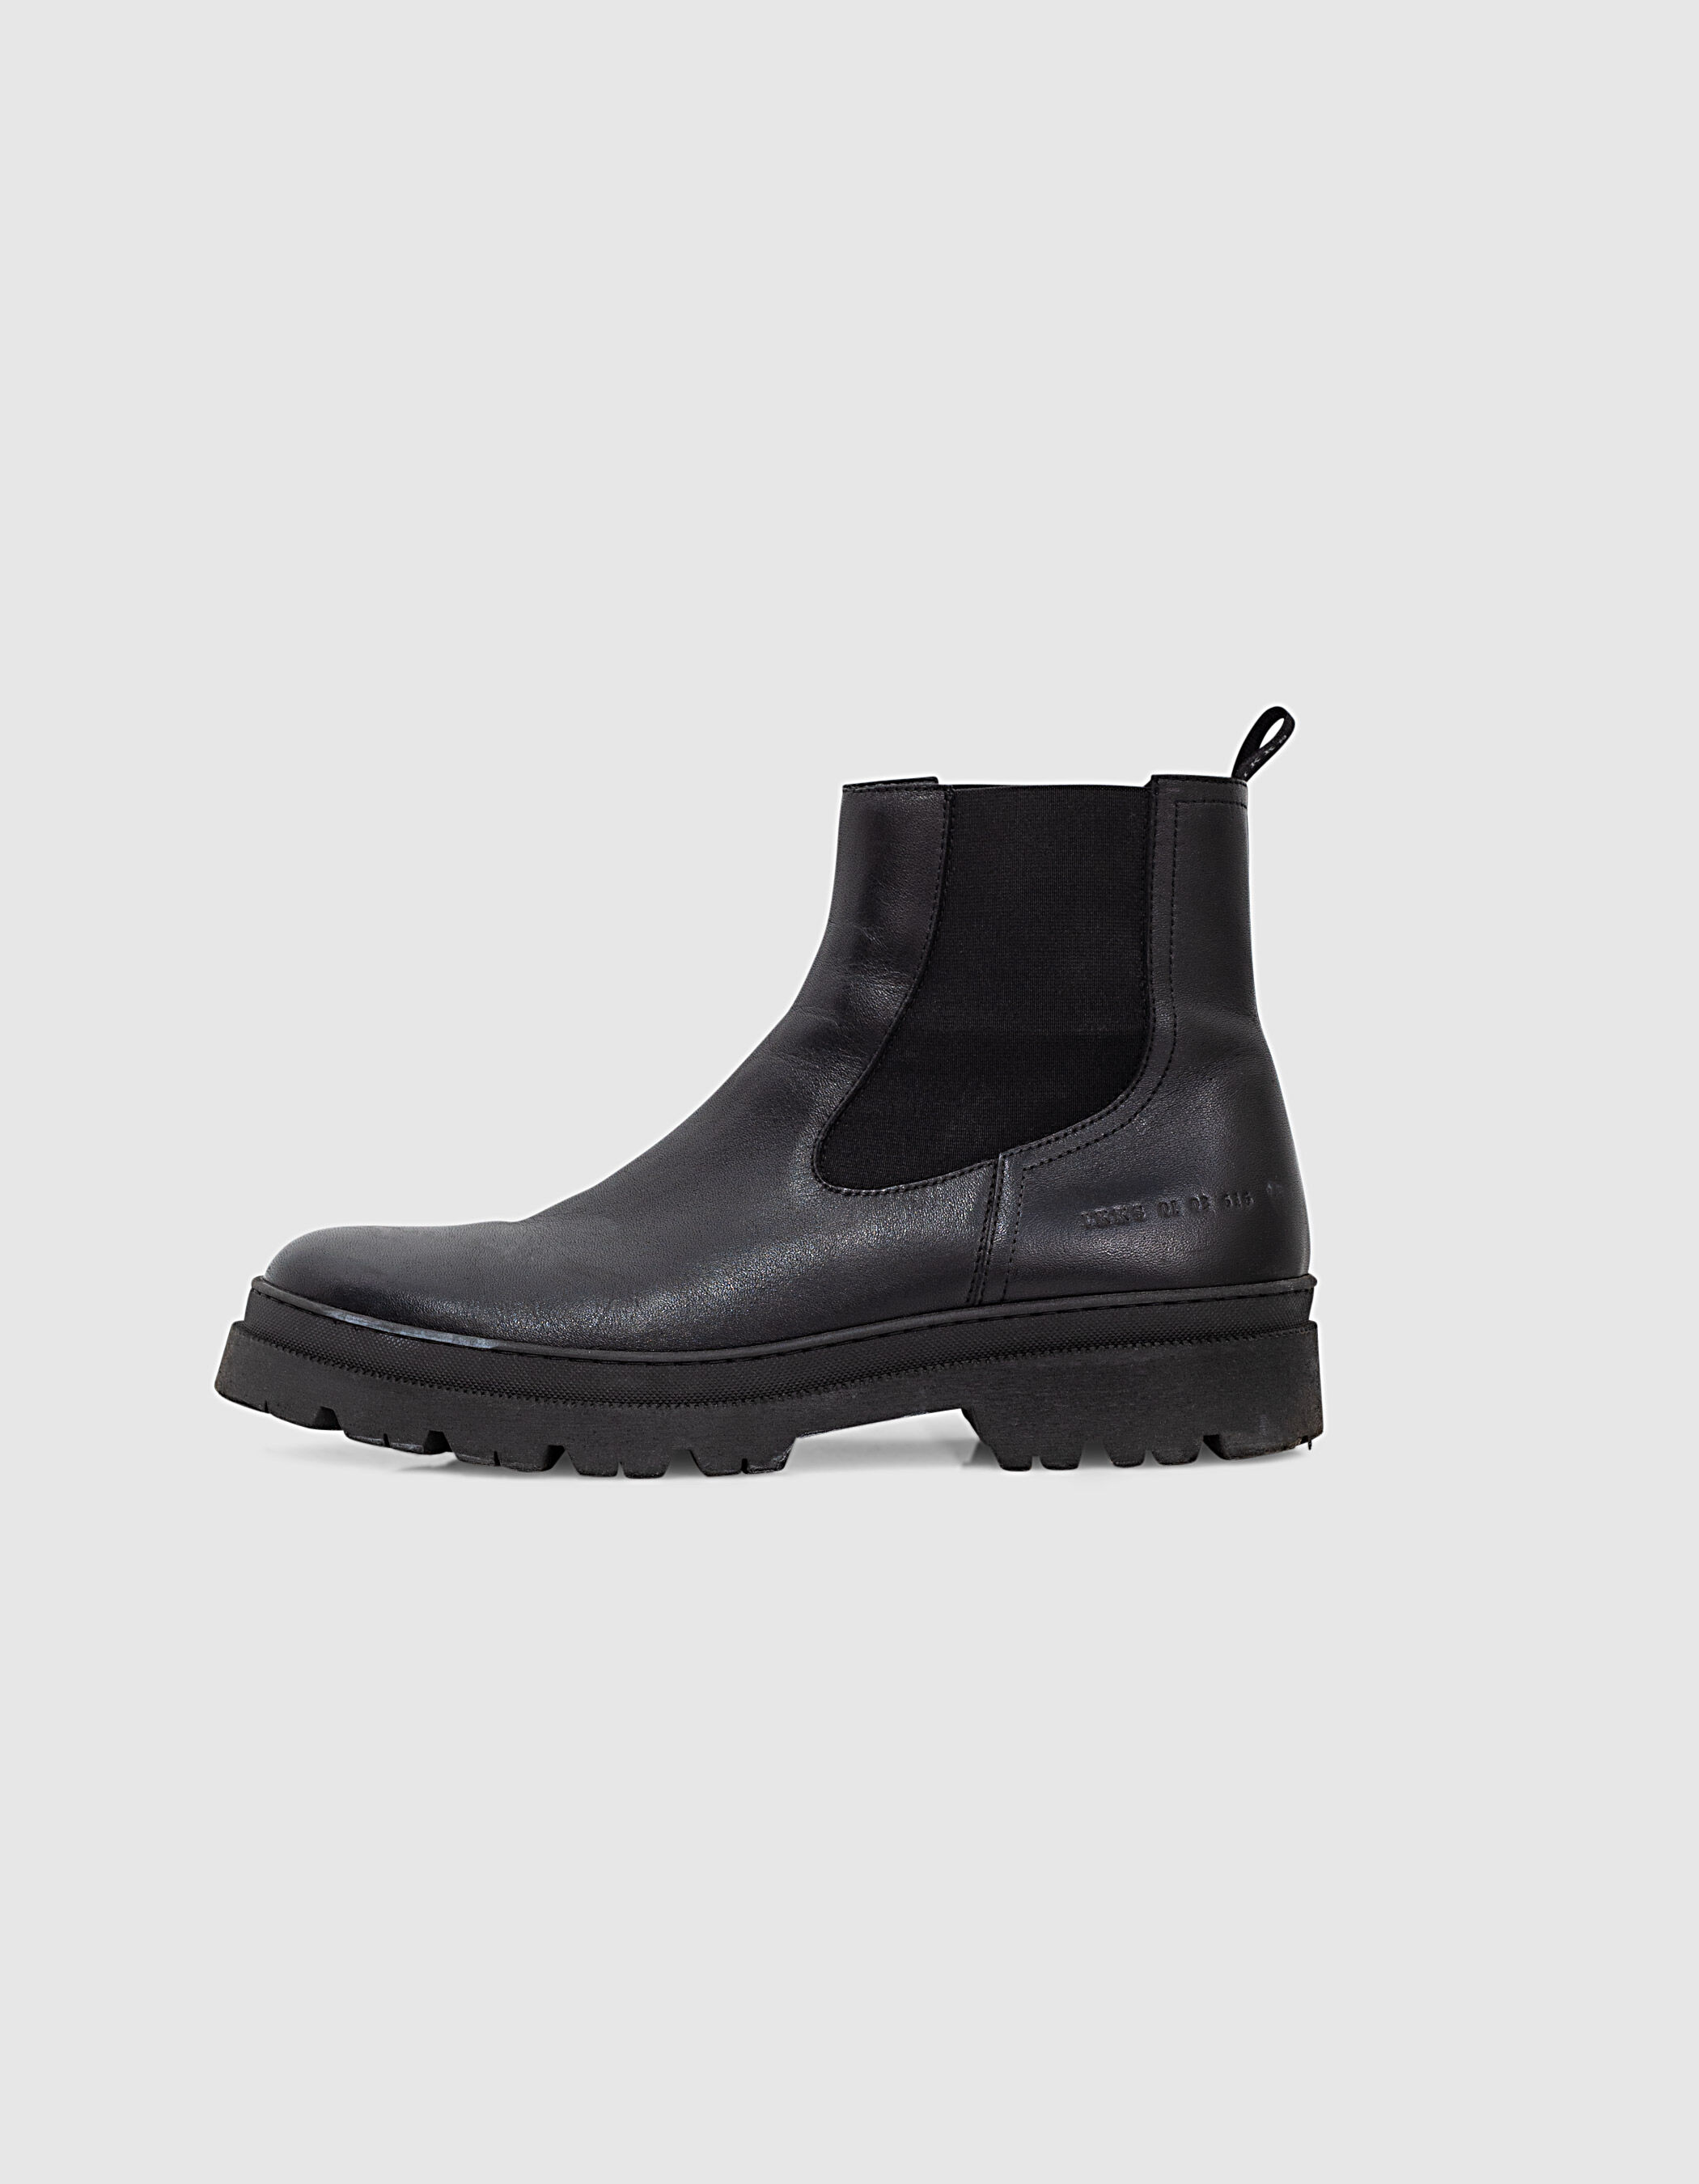 Men's black leather Chelsea boots with notched sole